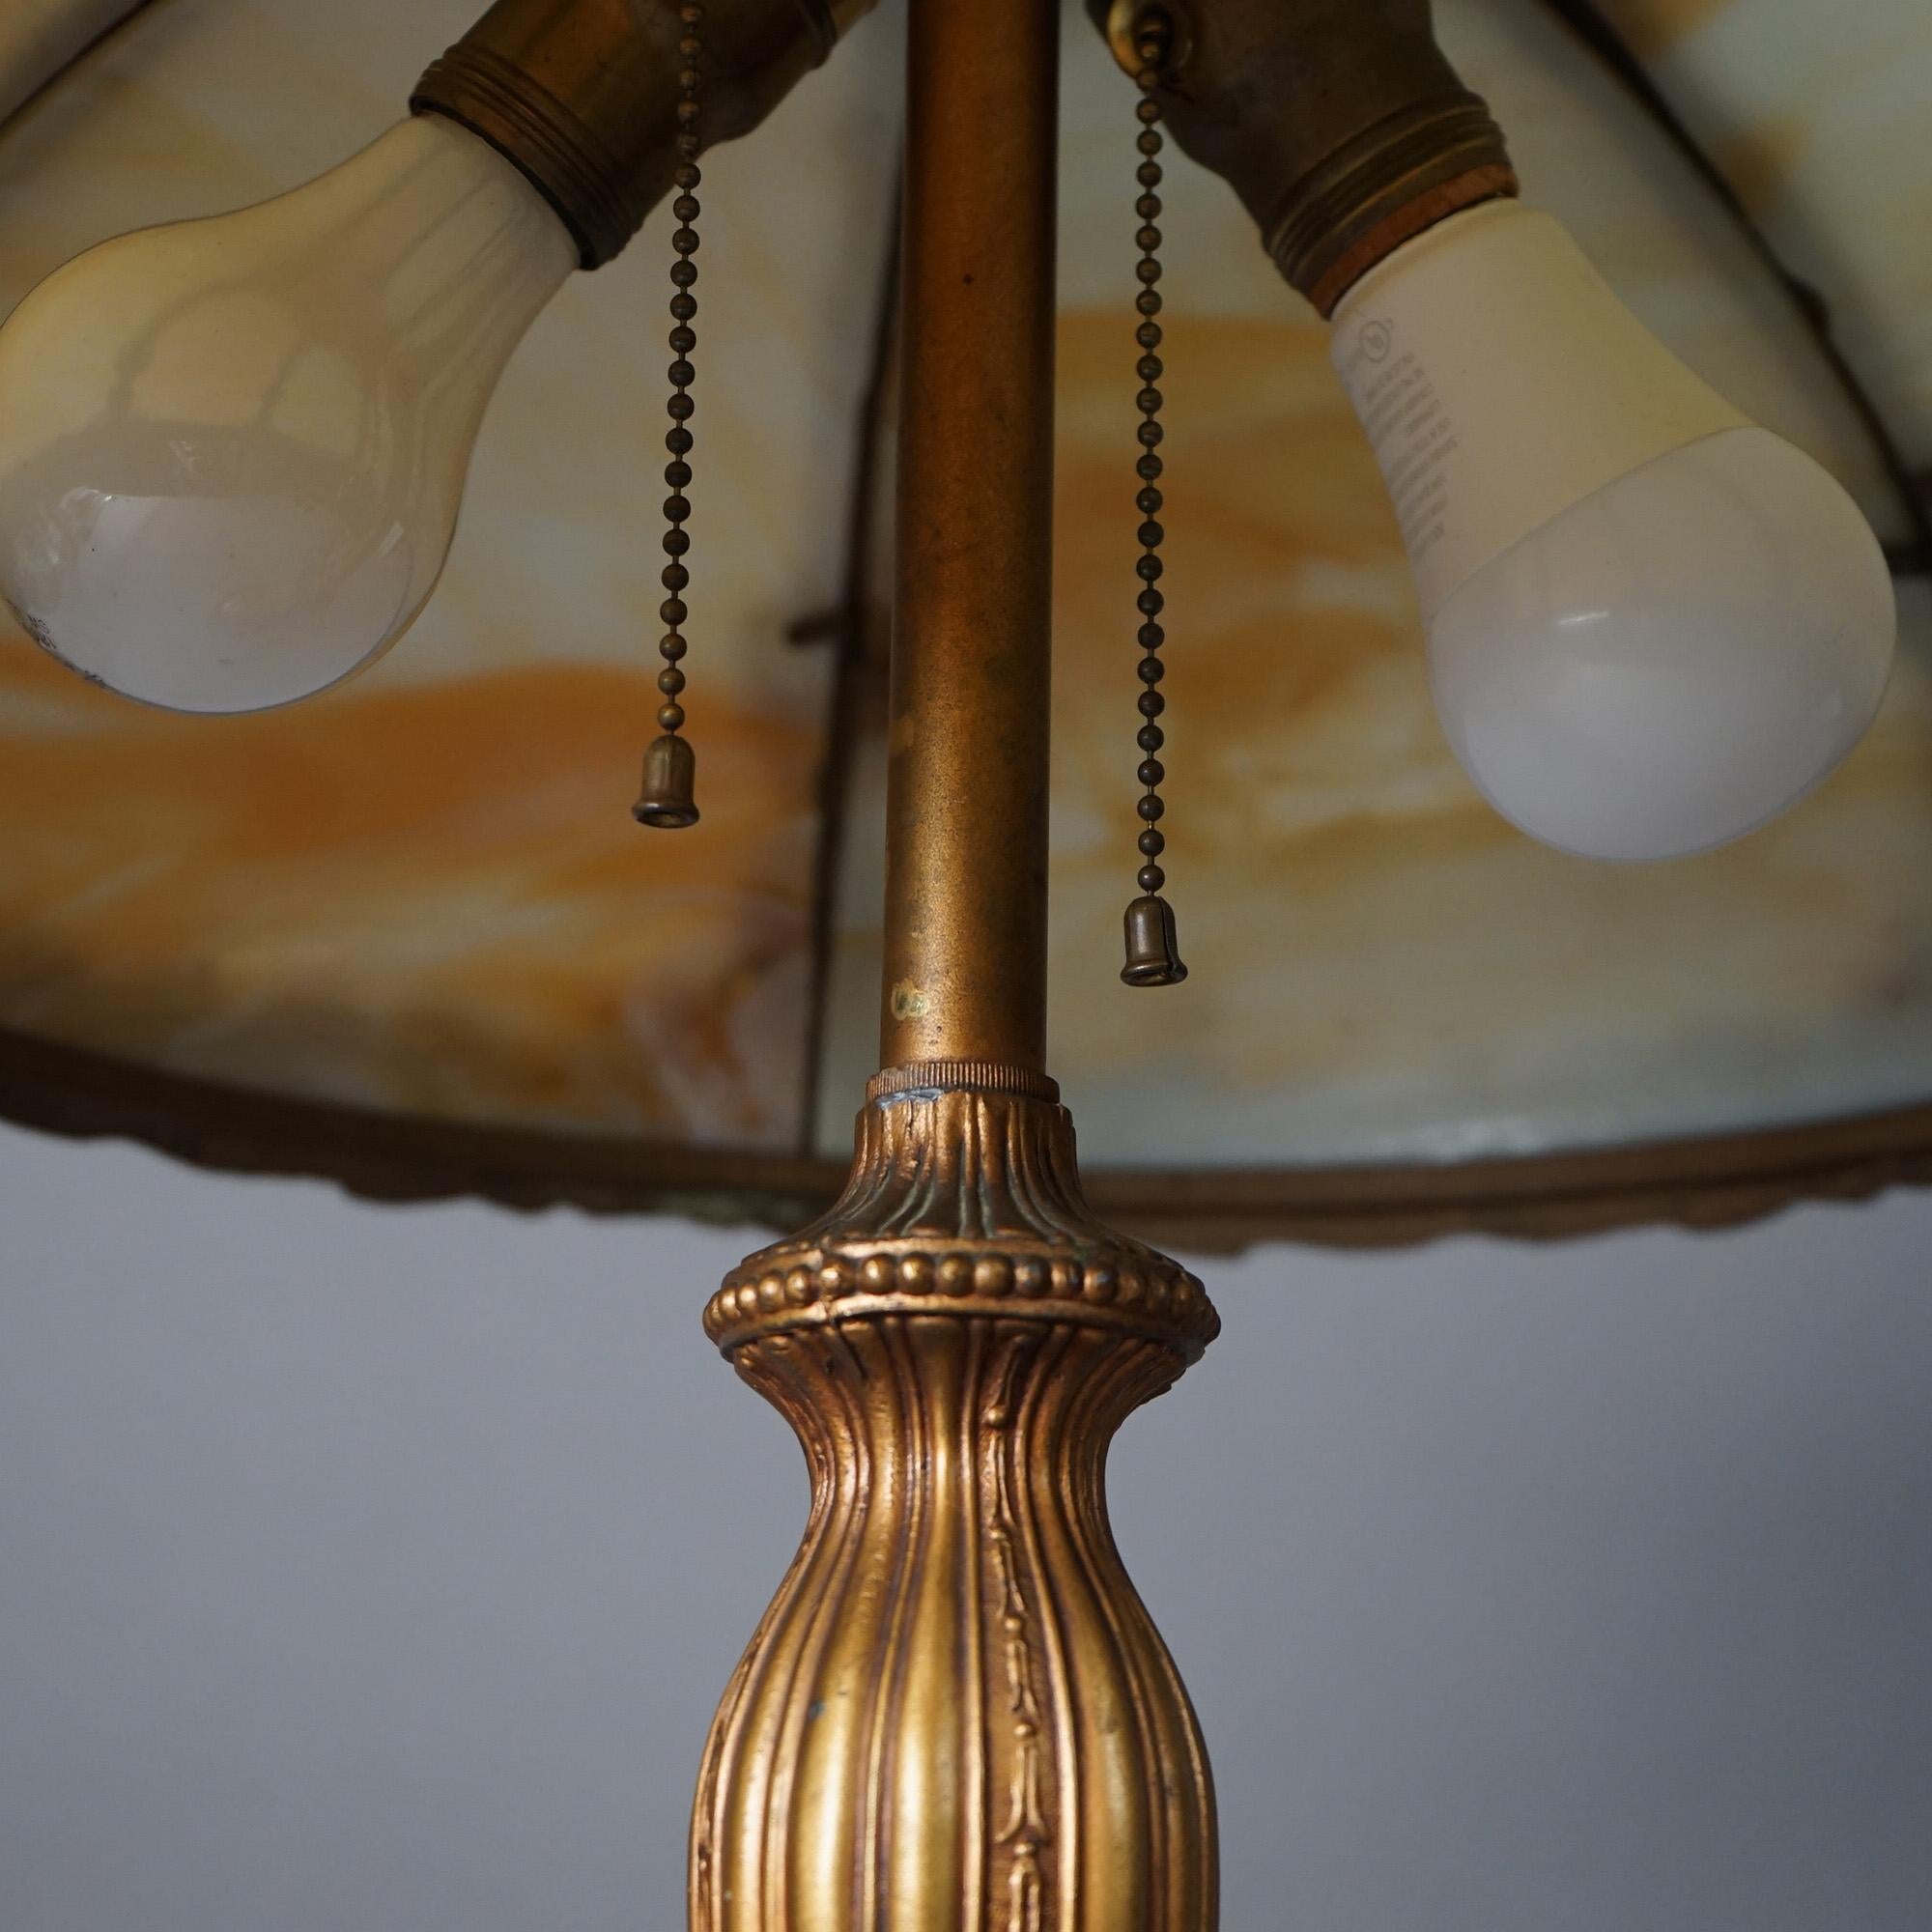 Antique Arts & Crafts Bradley & Hubbard School Slag Glass Table Lamp c1920 In Good Condition For Sale In Big Flats, NY